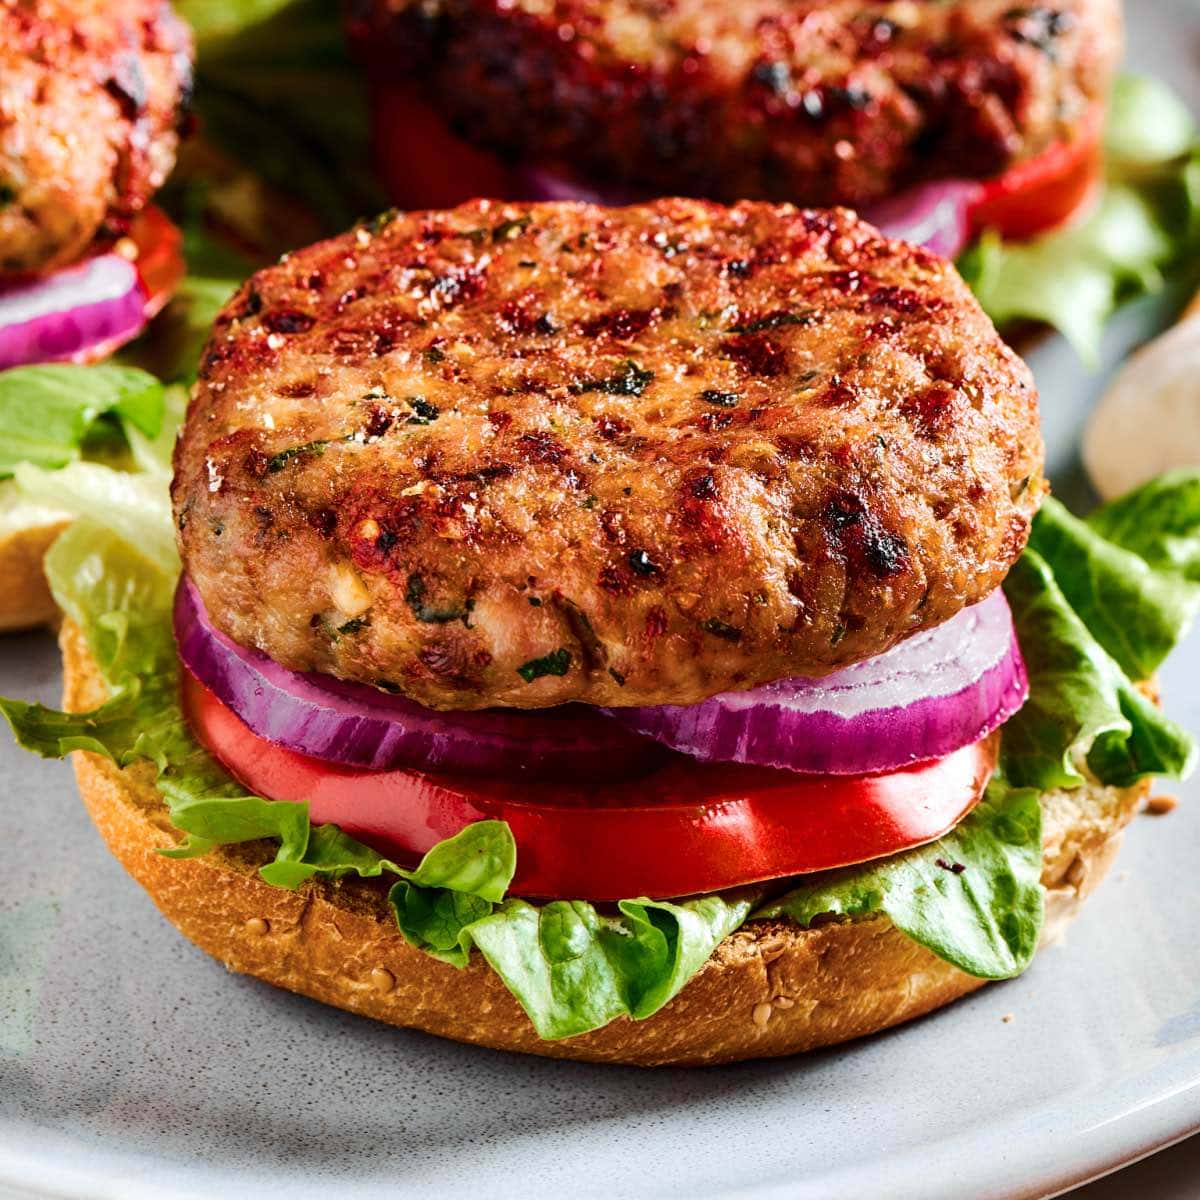 Turkey Burgers Recipe - Made From Leftover Turkey - Make Your Meals